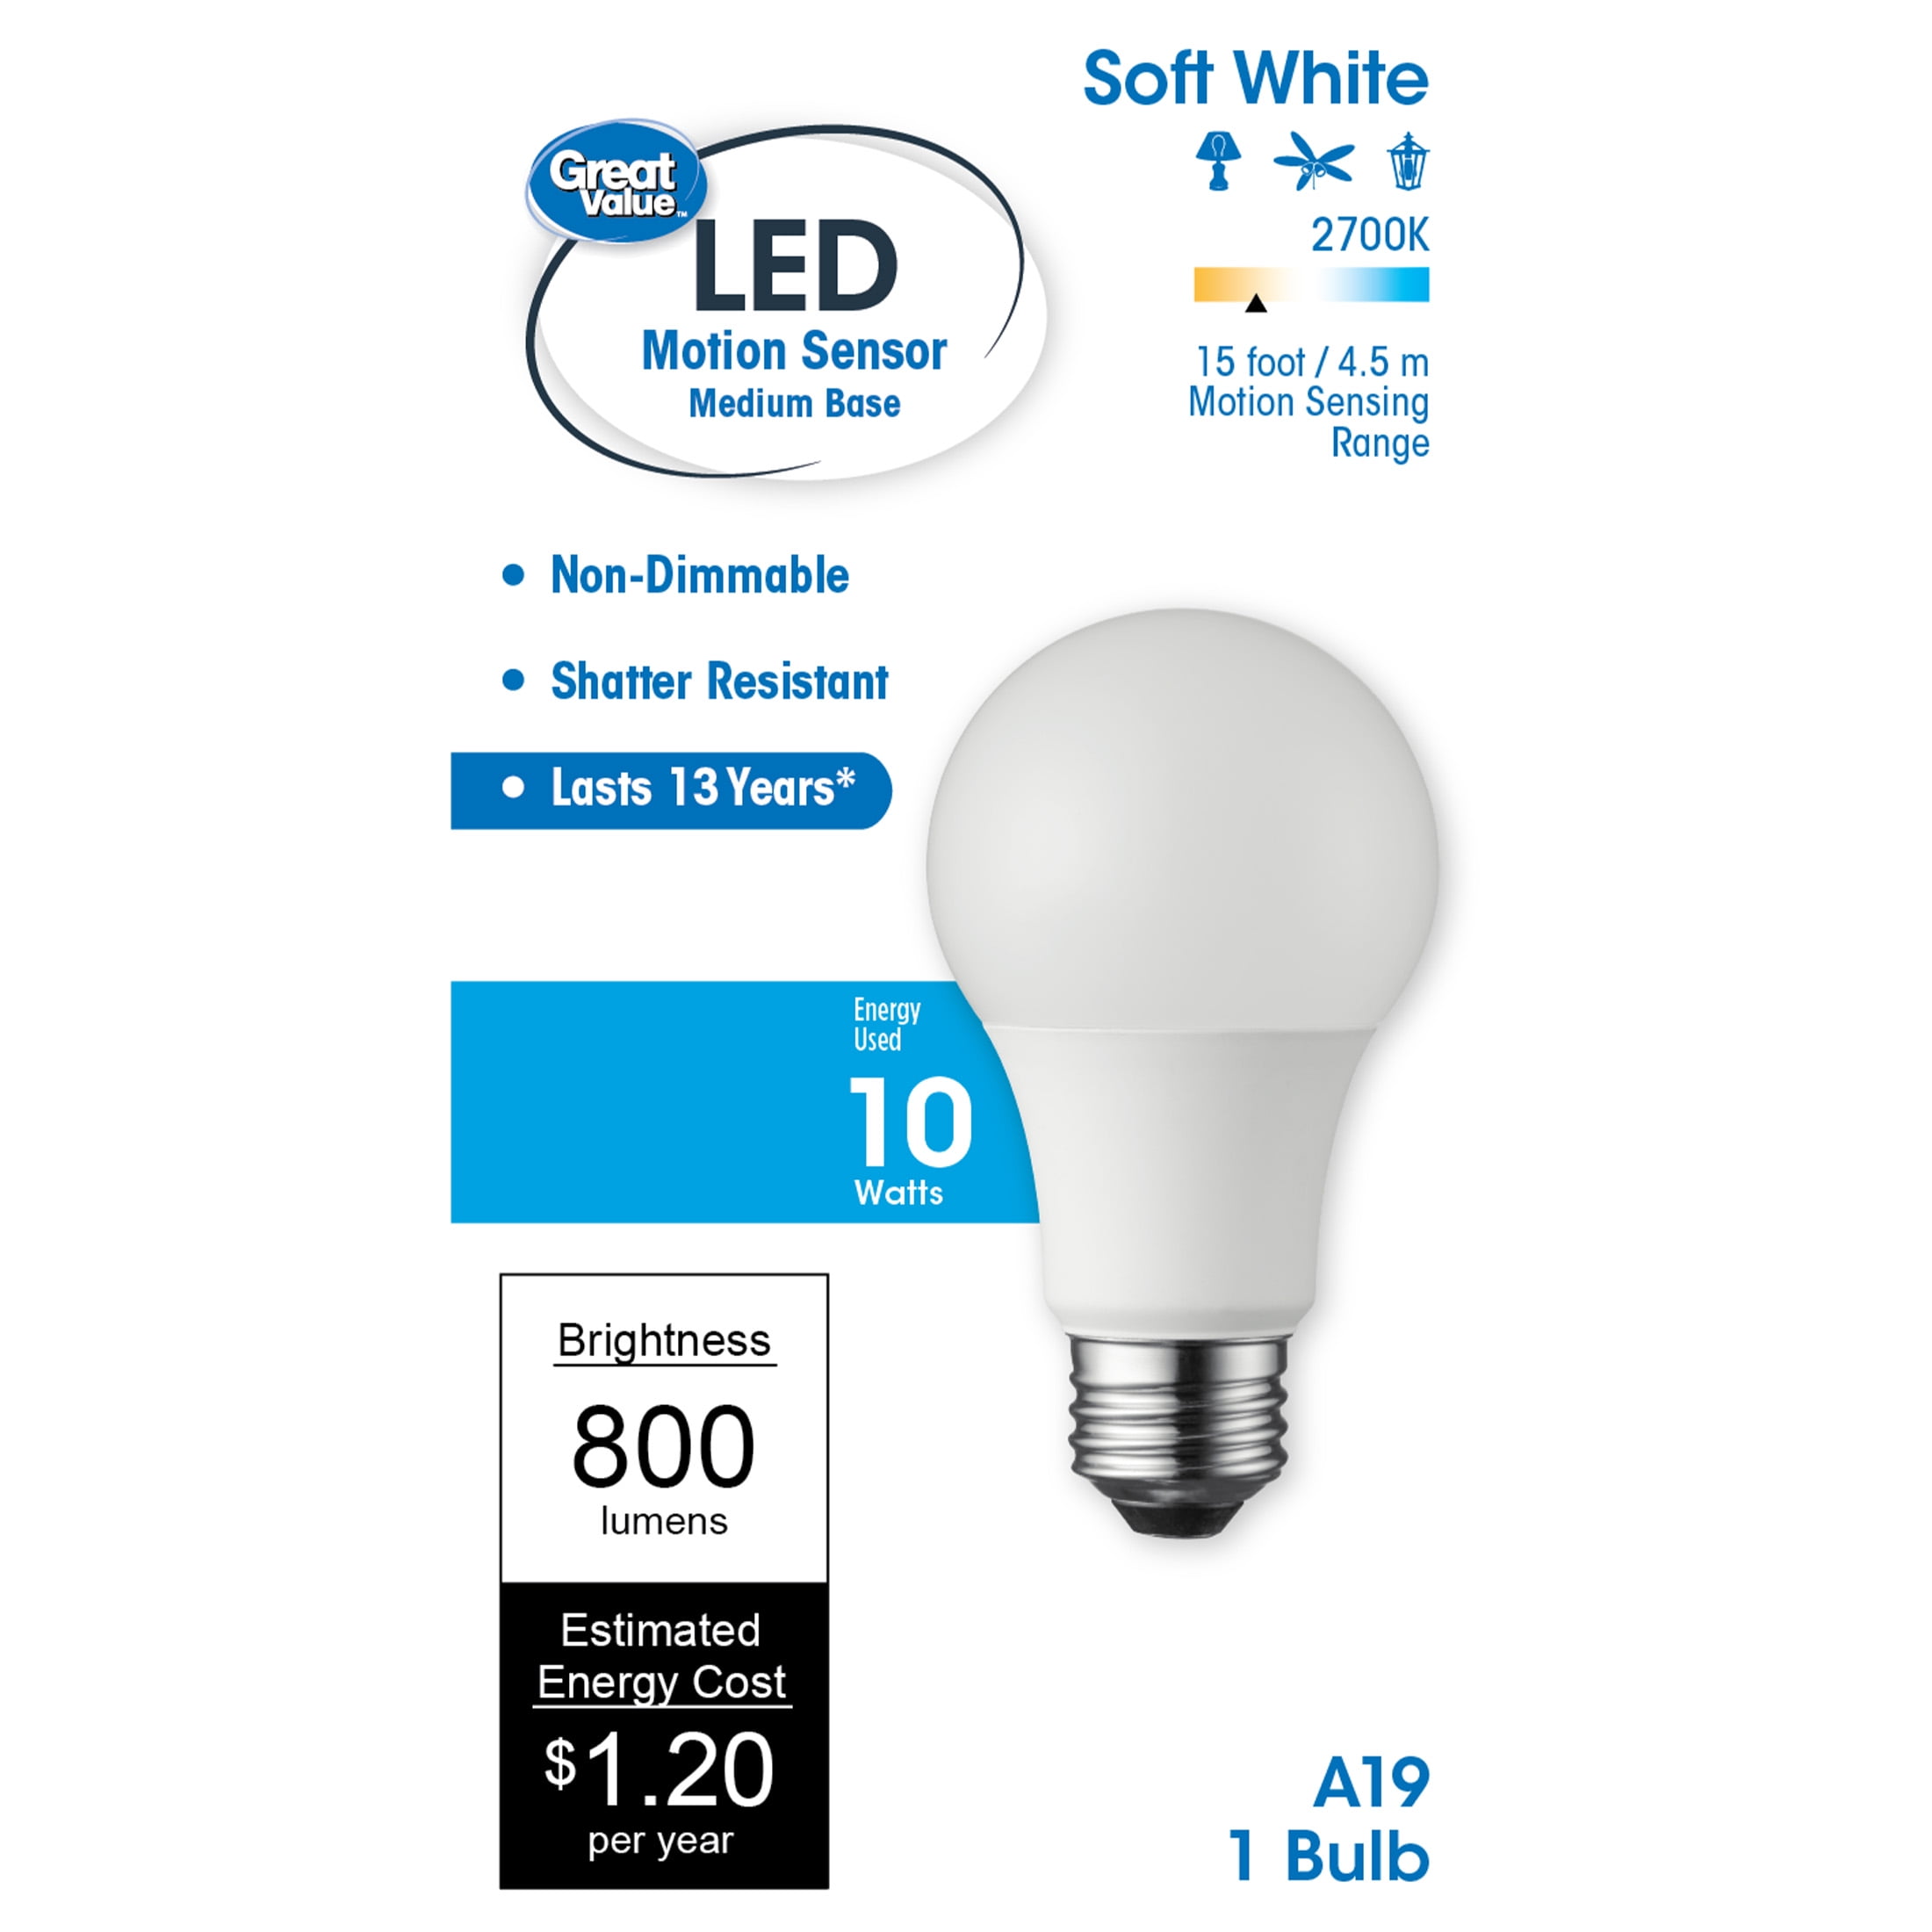 in stand houden motor schot Great Value LED Light Bulb, 10W (60W Equivalent) A19 Motion Sensor Lamp E26  Medium Base, Non-dimmable, Soft White, 1-Pack - Walmart.com